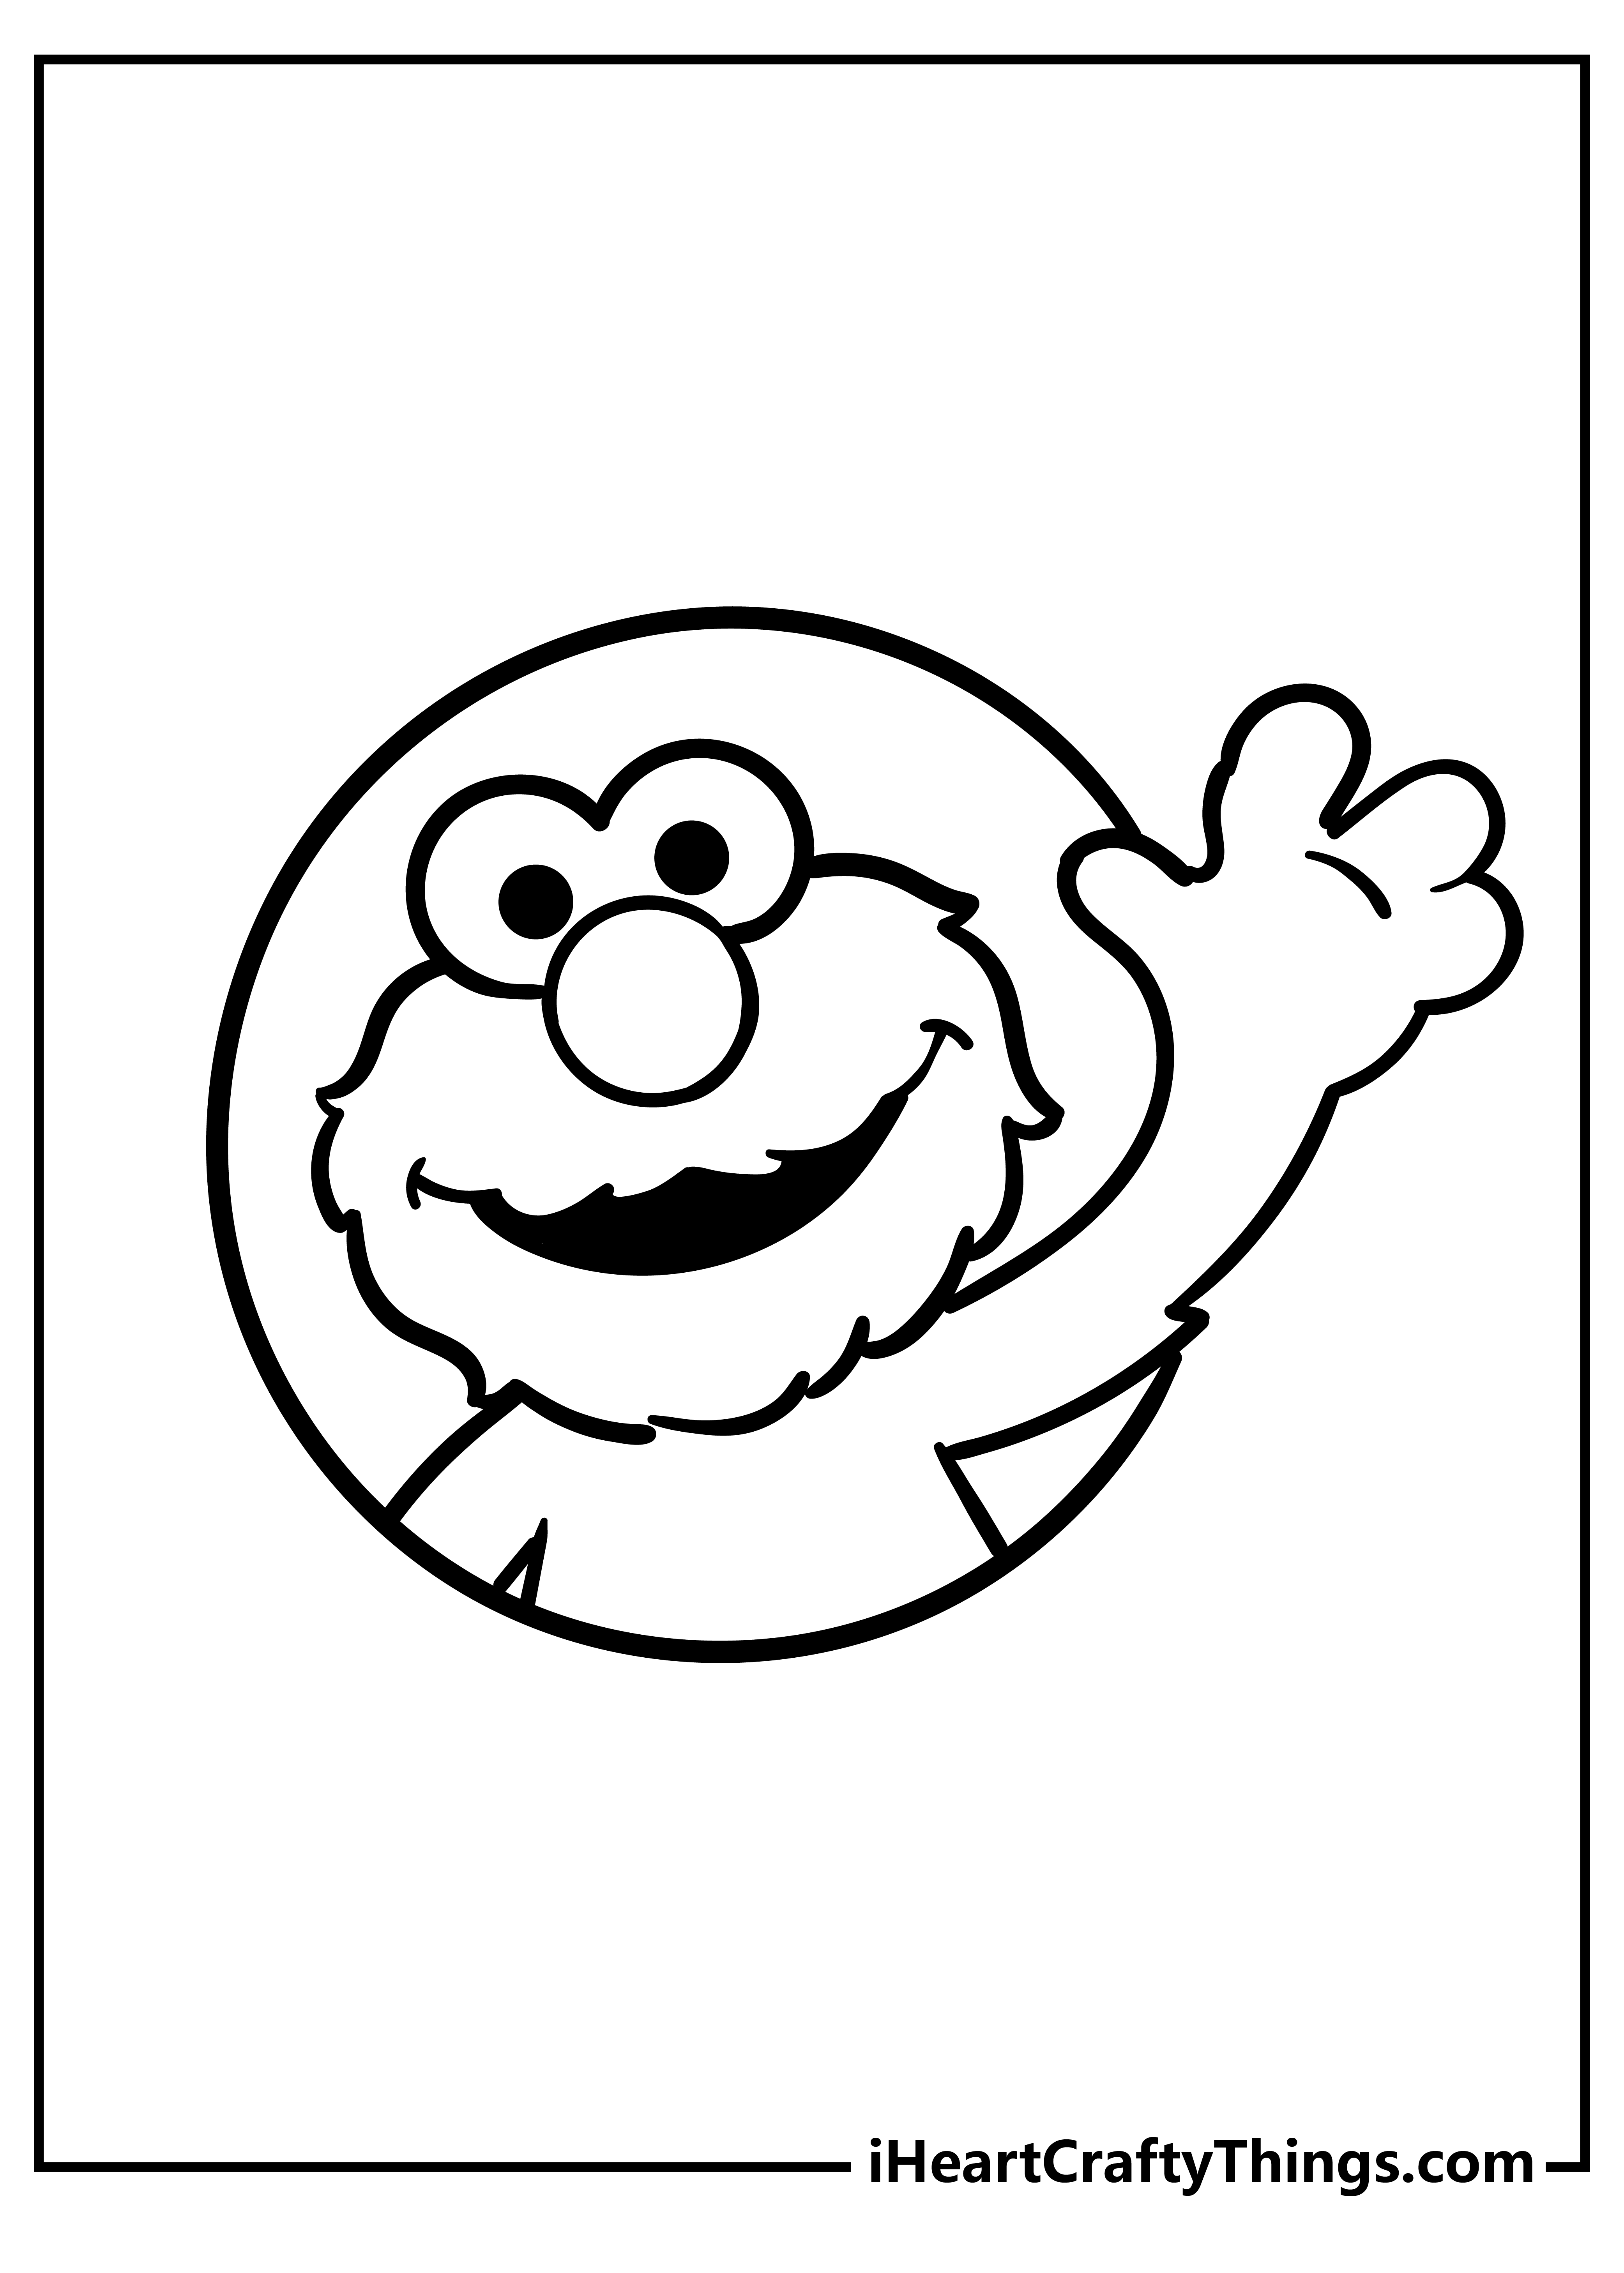 Elmo Coloring Pages for preschoolers free printable